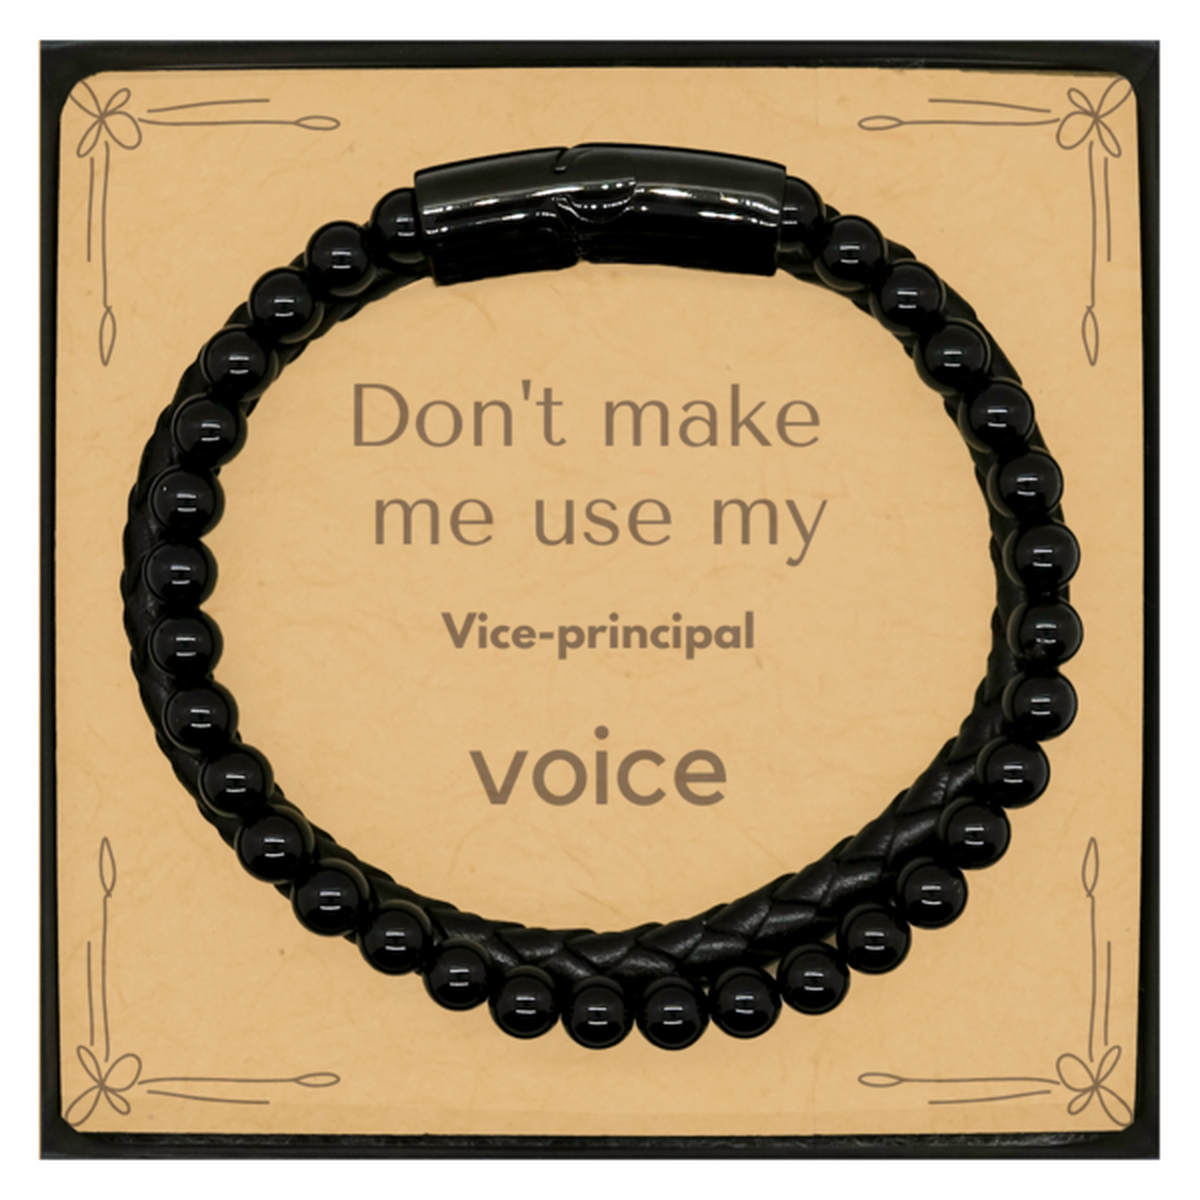 Don't make me use my Vice-principal voice, Sarcasm Vice-principal Card Gifts, Christmas Vice-principal Stone Leather Bracelets Birthday Unique Gifts For Vice-principal Coworkers, Men, Women, Colleague, Friends